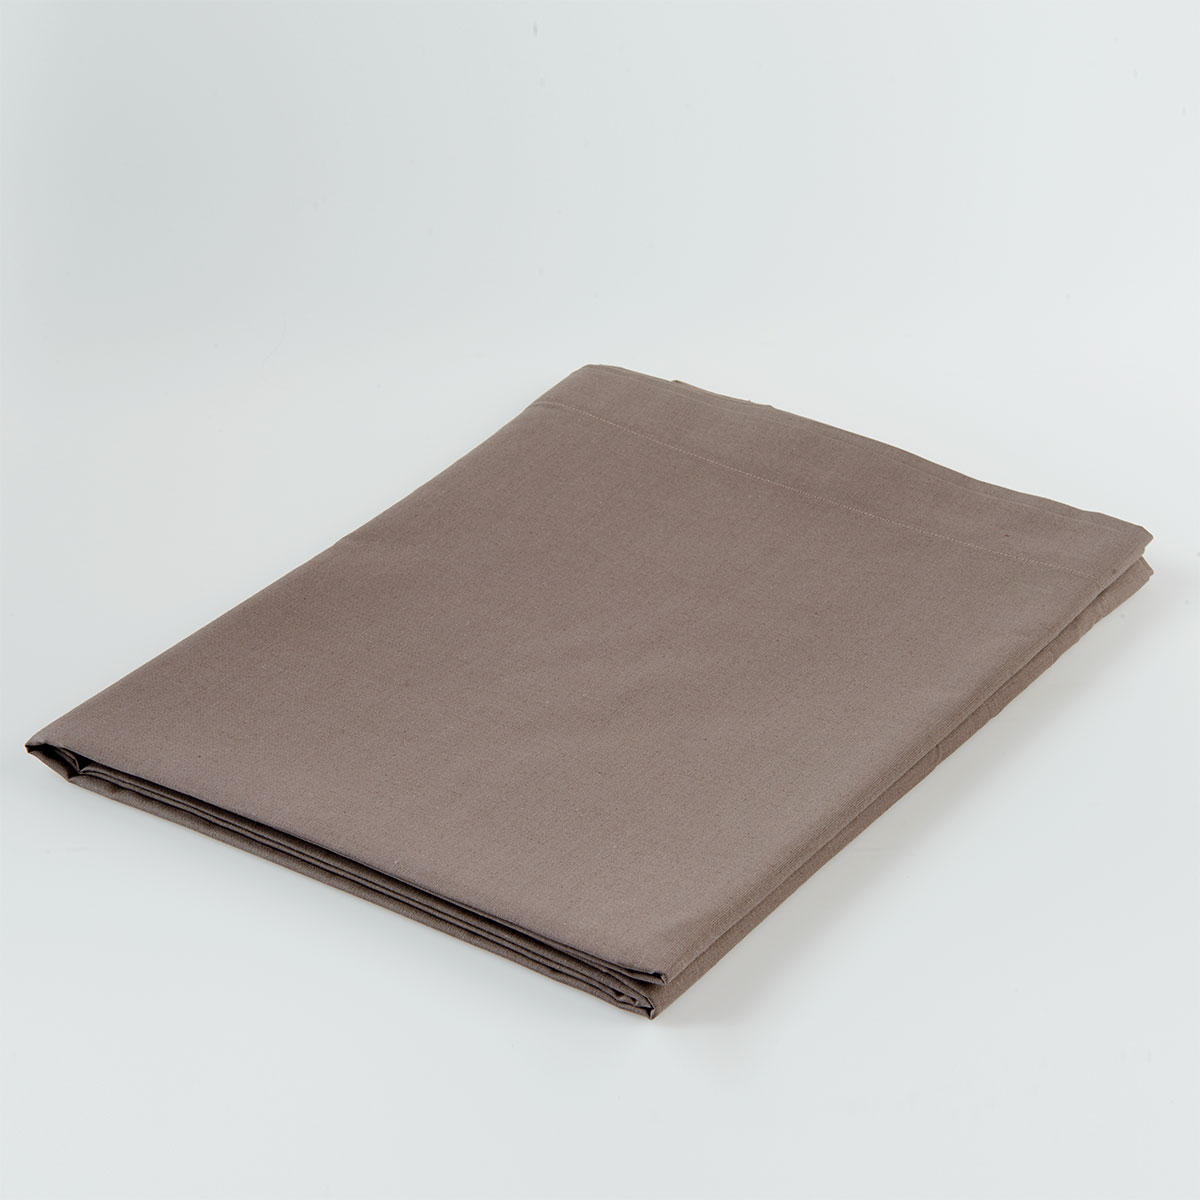 Housse de couette forme sac taupe